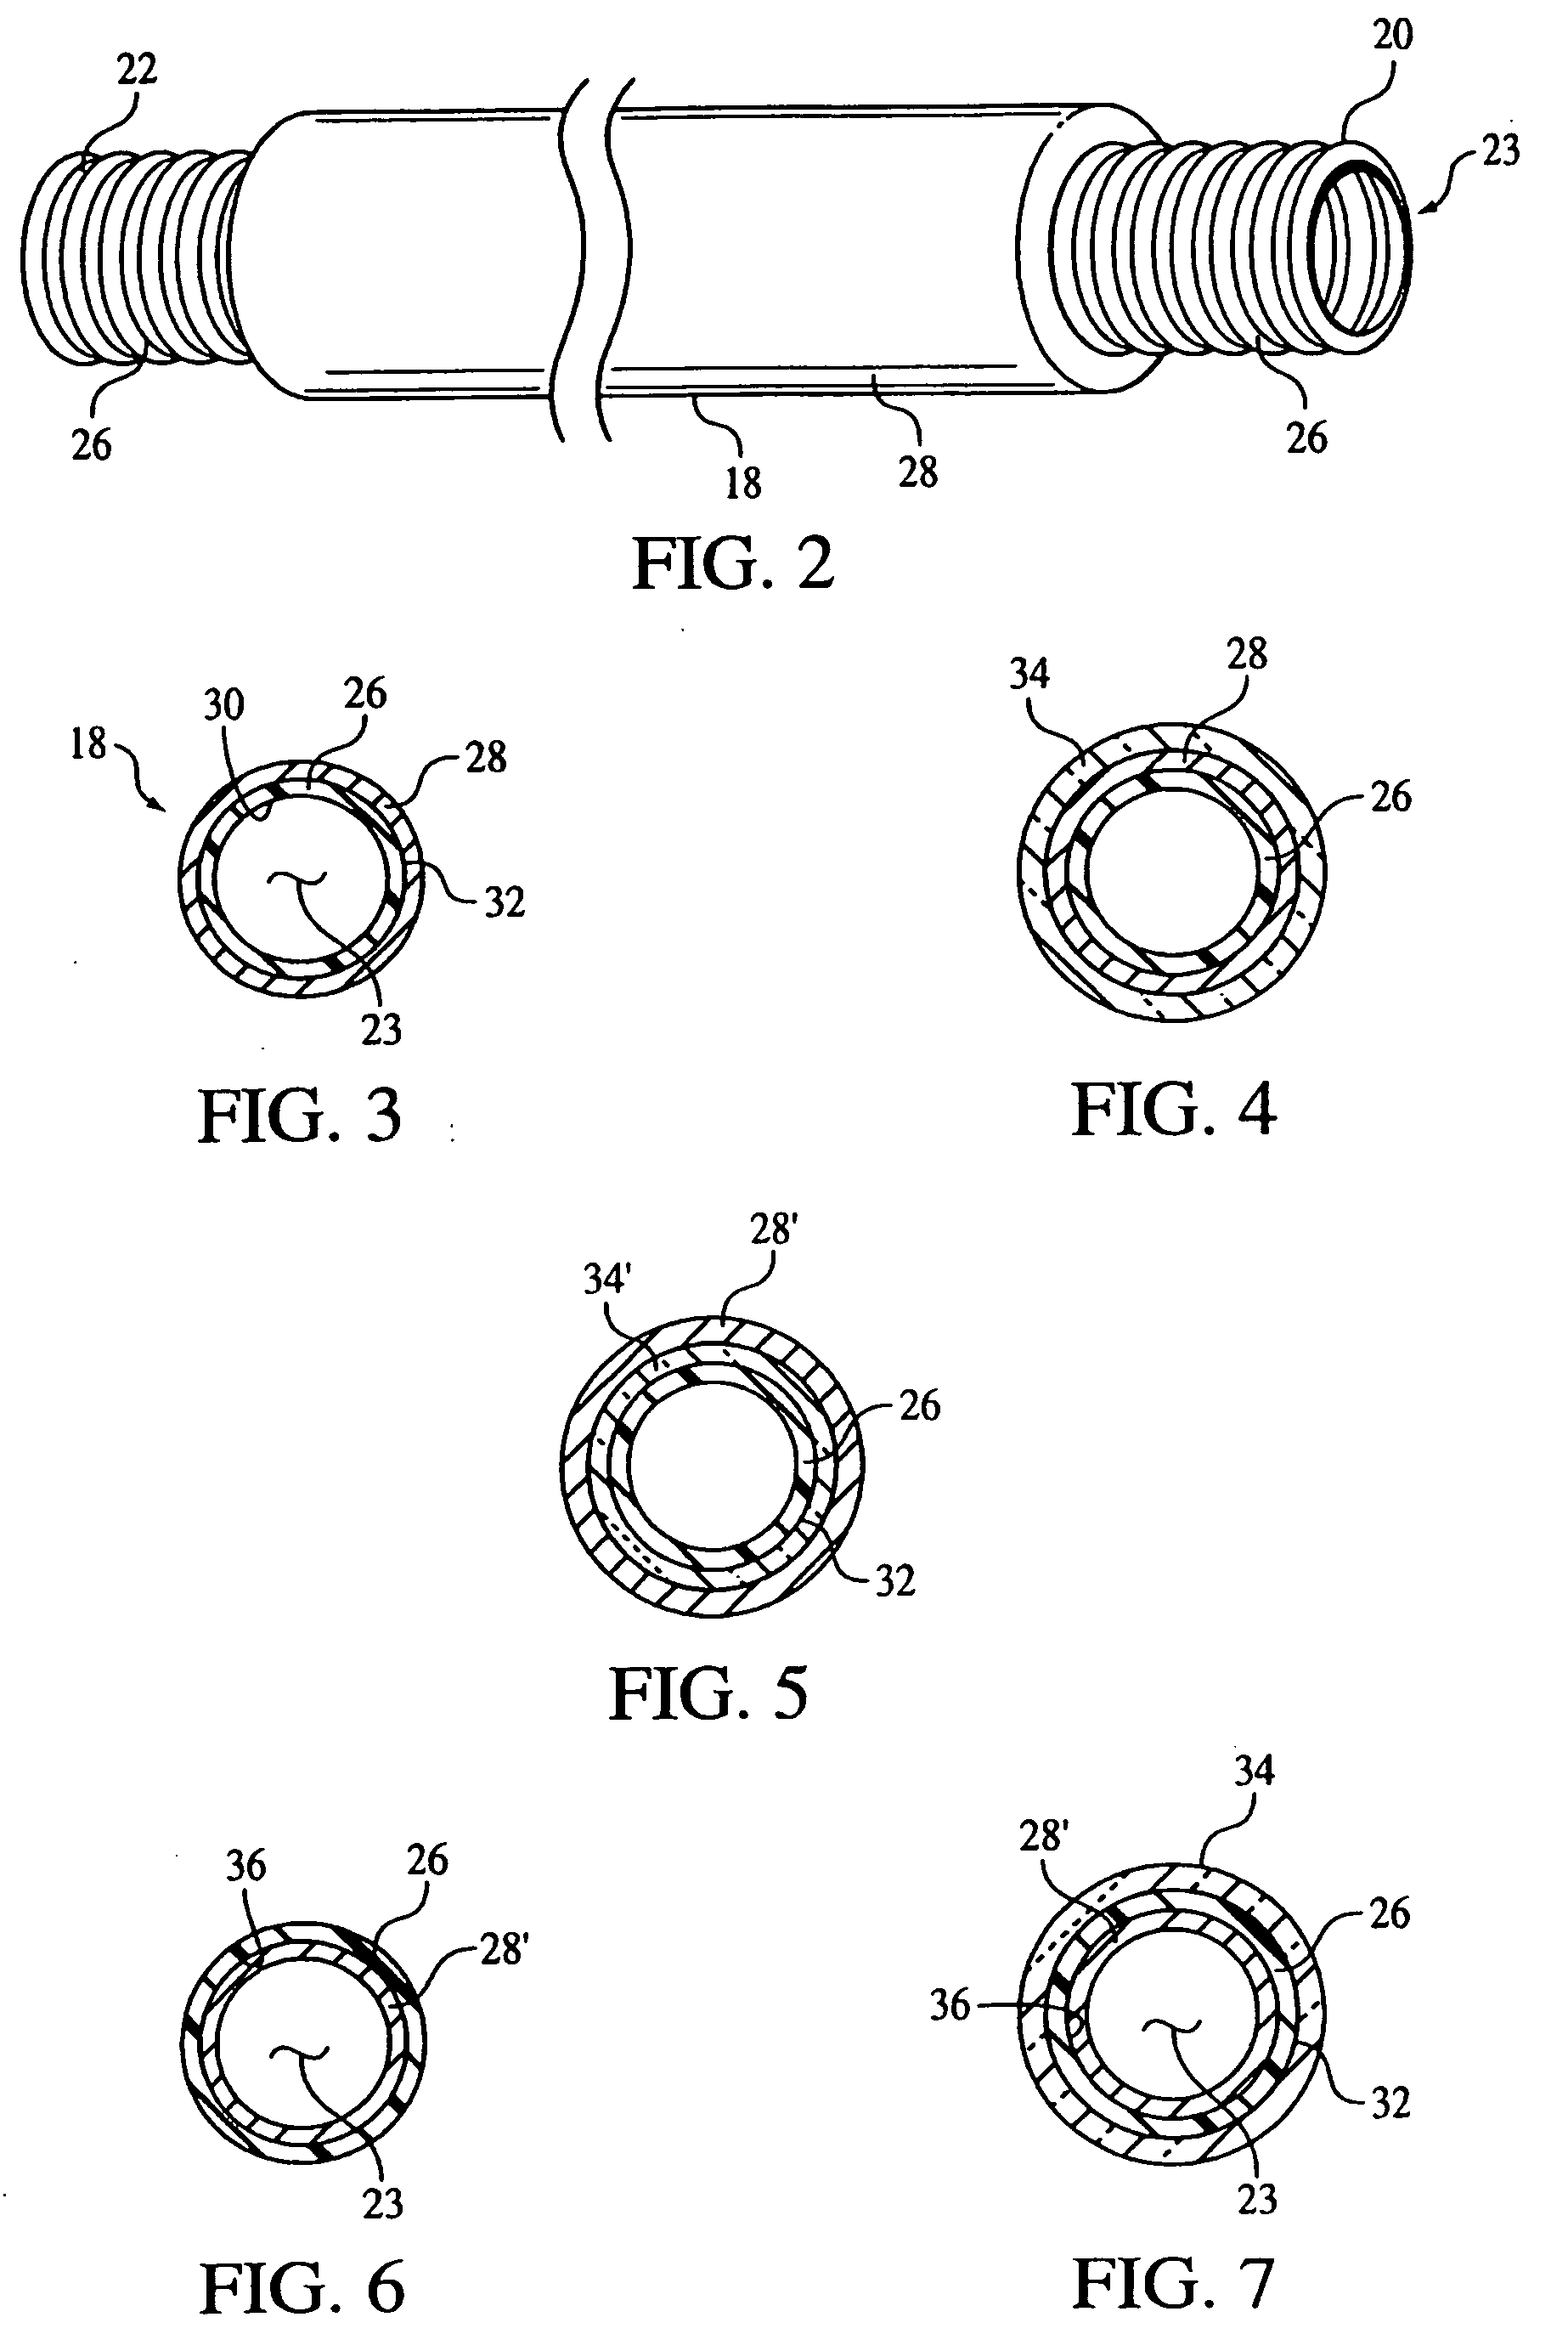 Condensation reduction and management systems in a gas flow delivery system